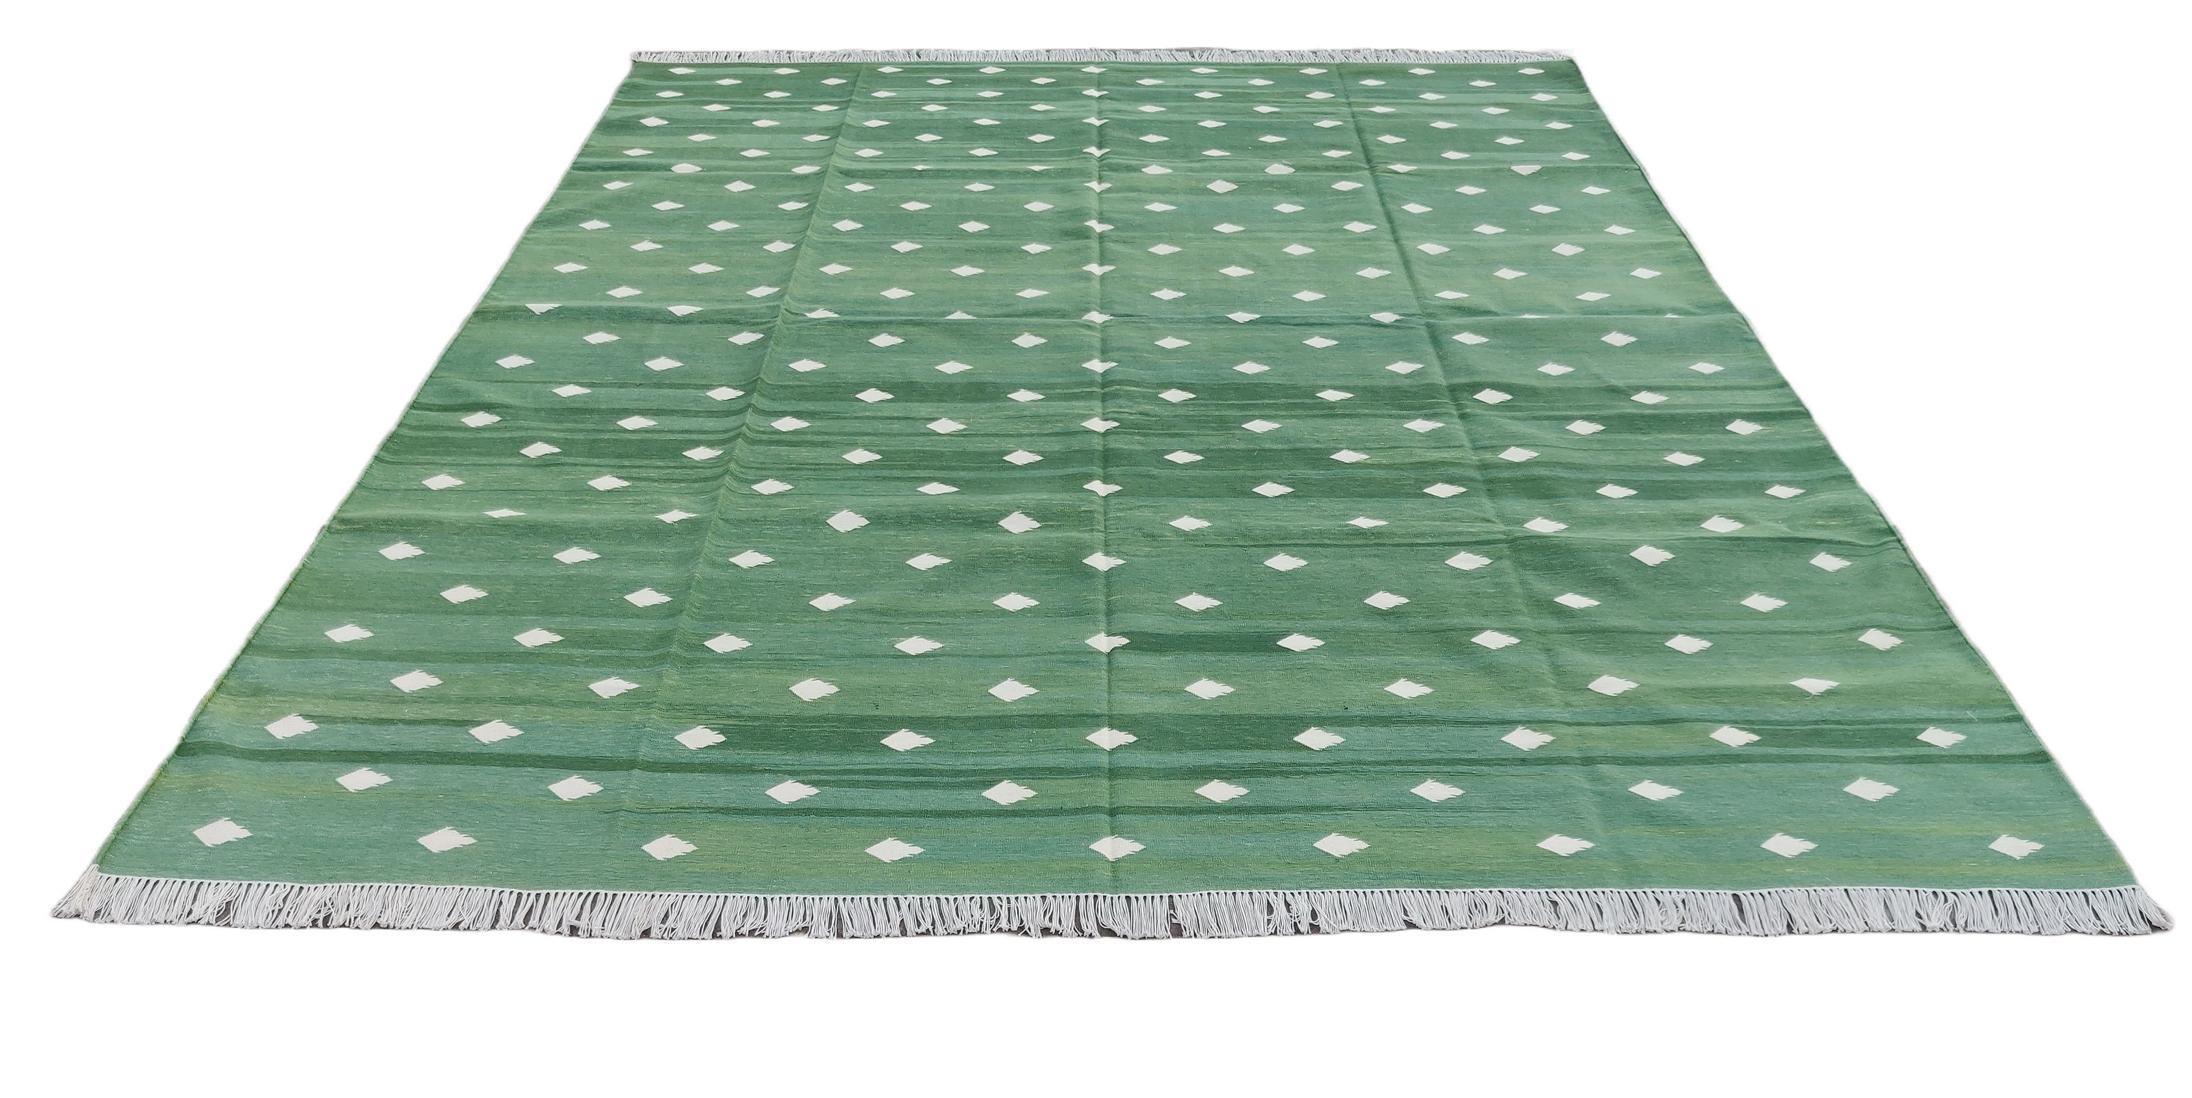 Mid-Century Modern Handmade Cotton Area Flat Weave Rug, 8x10 Green And White Leaf Indian Dhurrie For Sale